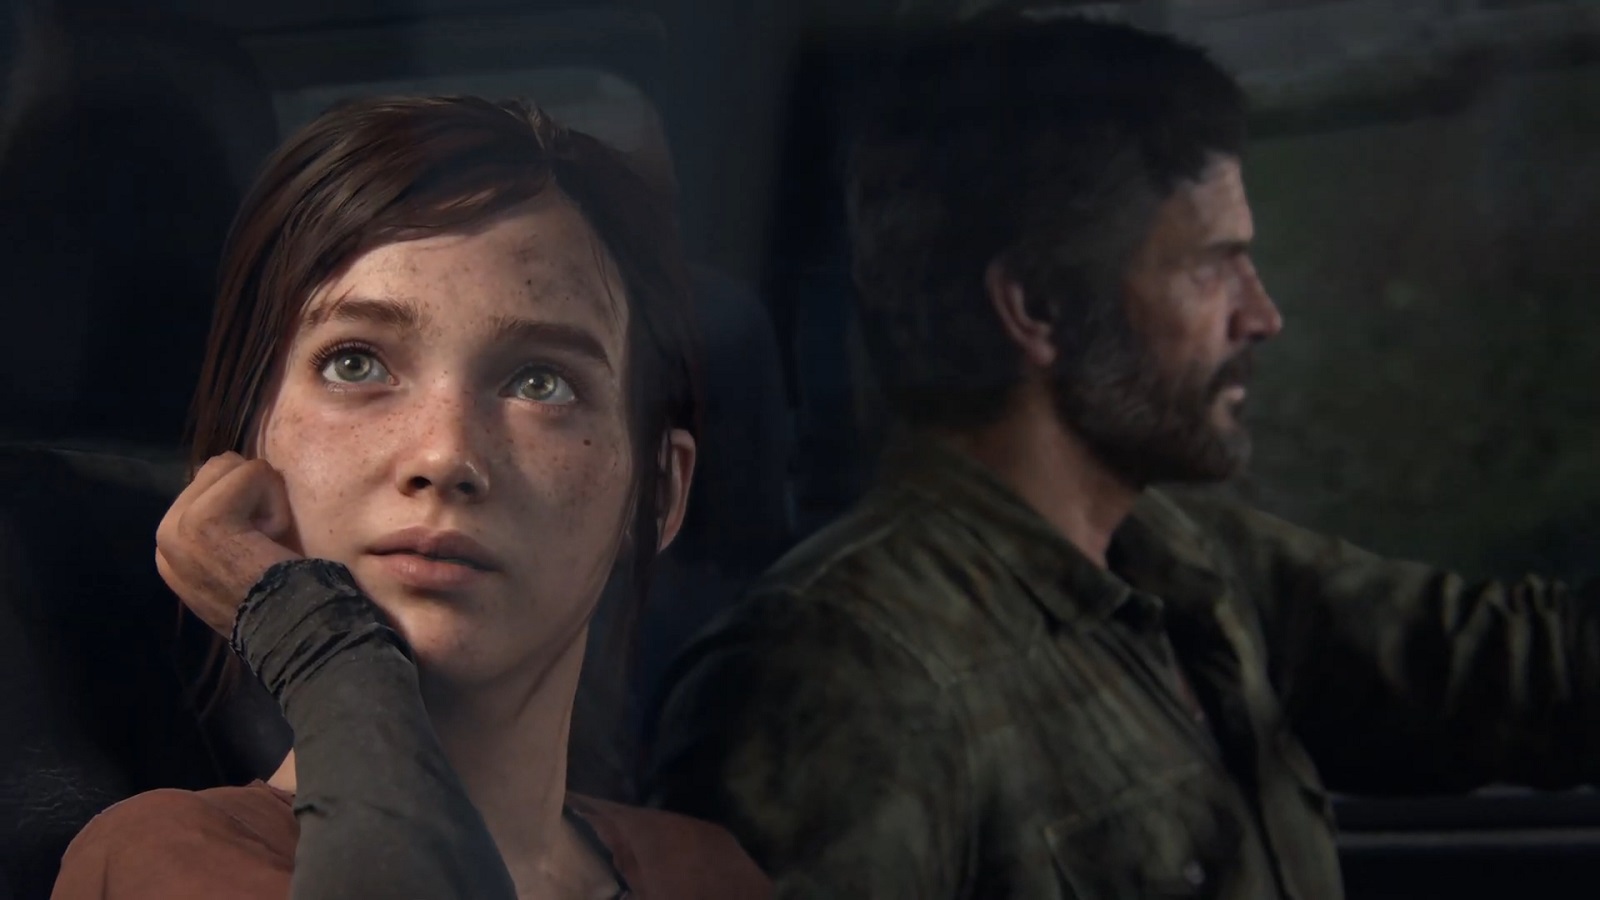 An image from “The Last of Us” game showing Joel and Ellie